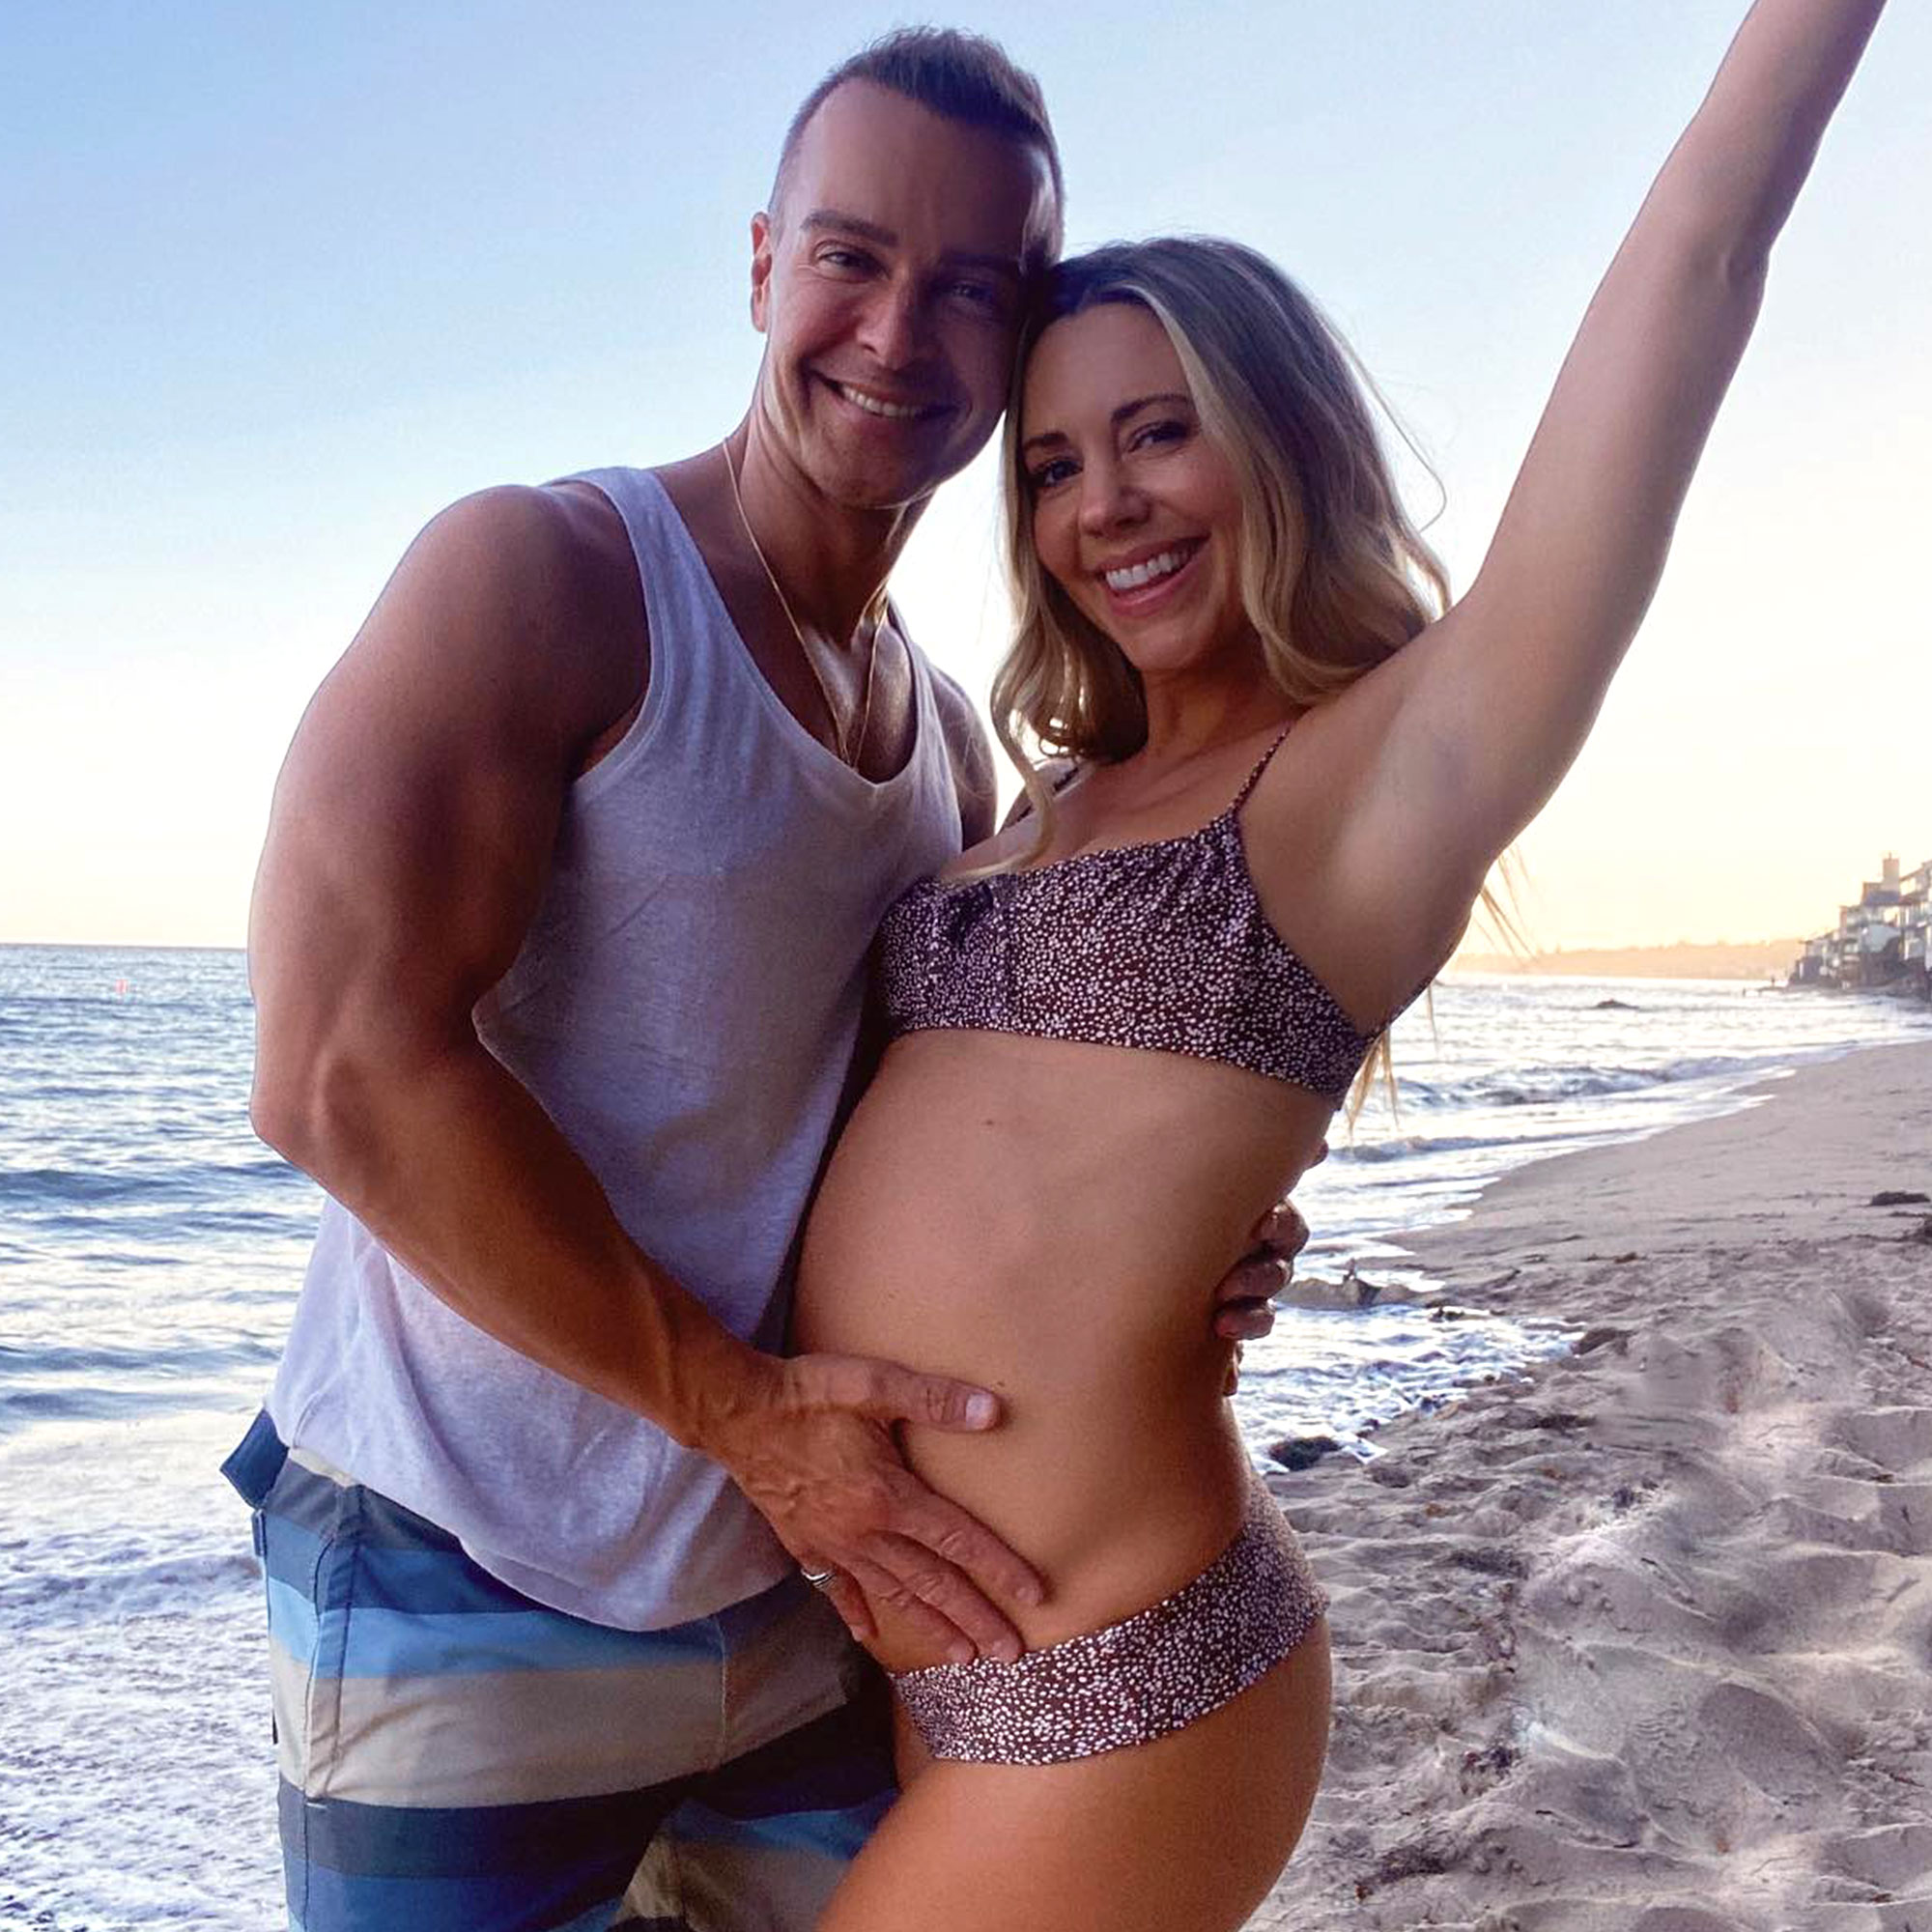 Joey Lawrences Wife Samantha Cope Is Pregnant With Their 1st Baby